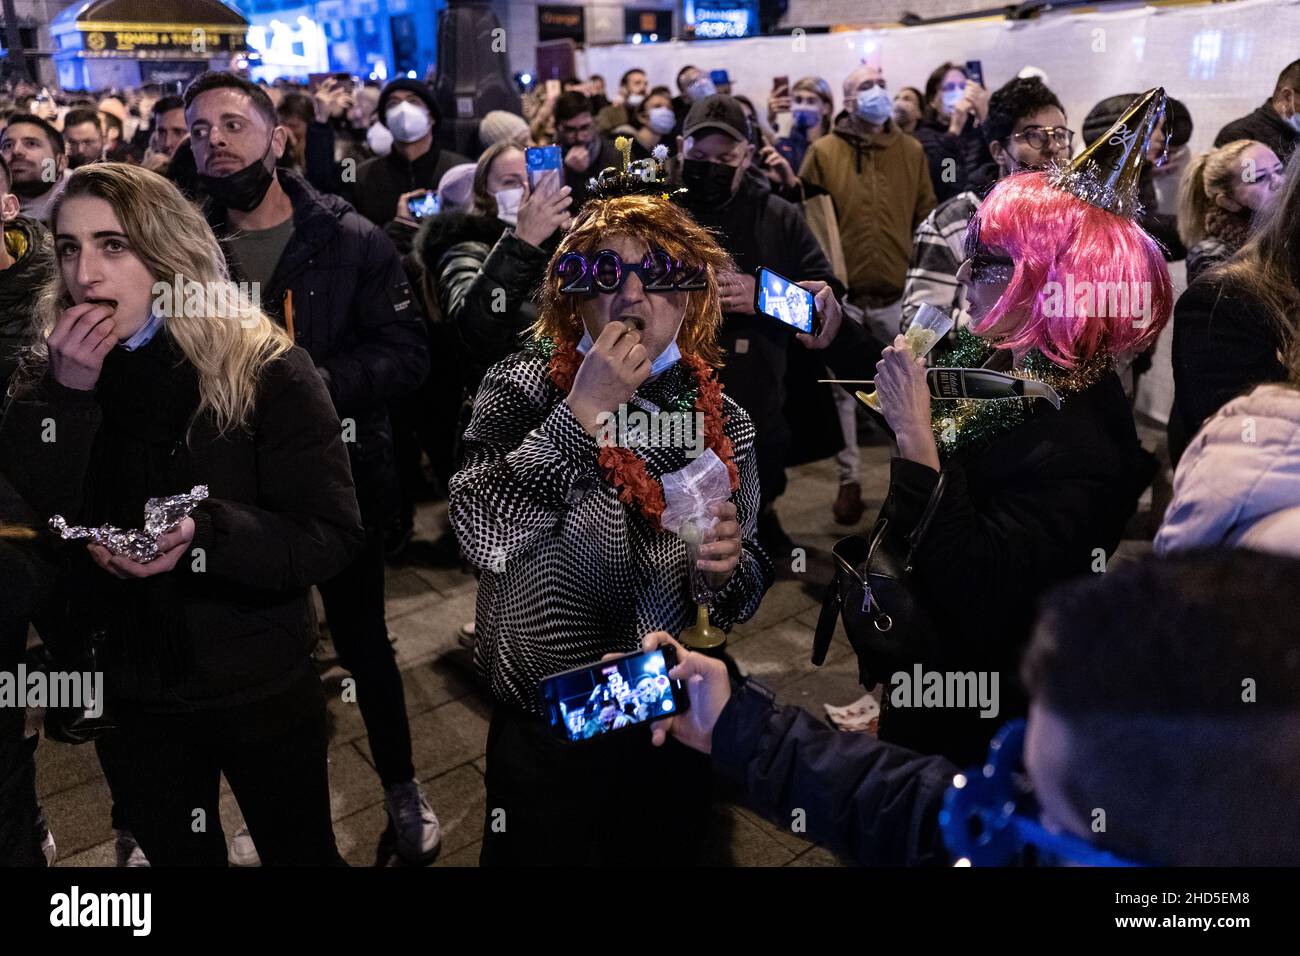 Madrid, Spain. 31st Dec, 2021. A man wearing a wig and 2022 googles is seen eating grapes in la Puerta de Sol during the preuvas celebrations in Madrid.Every year people gather in this Puerta del Sol in Madrid to take advantage of the New Year's Eve bells to celebrate the start of the new year in what is called the Preuvas celebration. (Credit Image: © Cristobal Ospina/SOPA Images via ZUMA Press Wire) Stock Photo